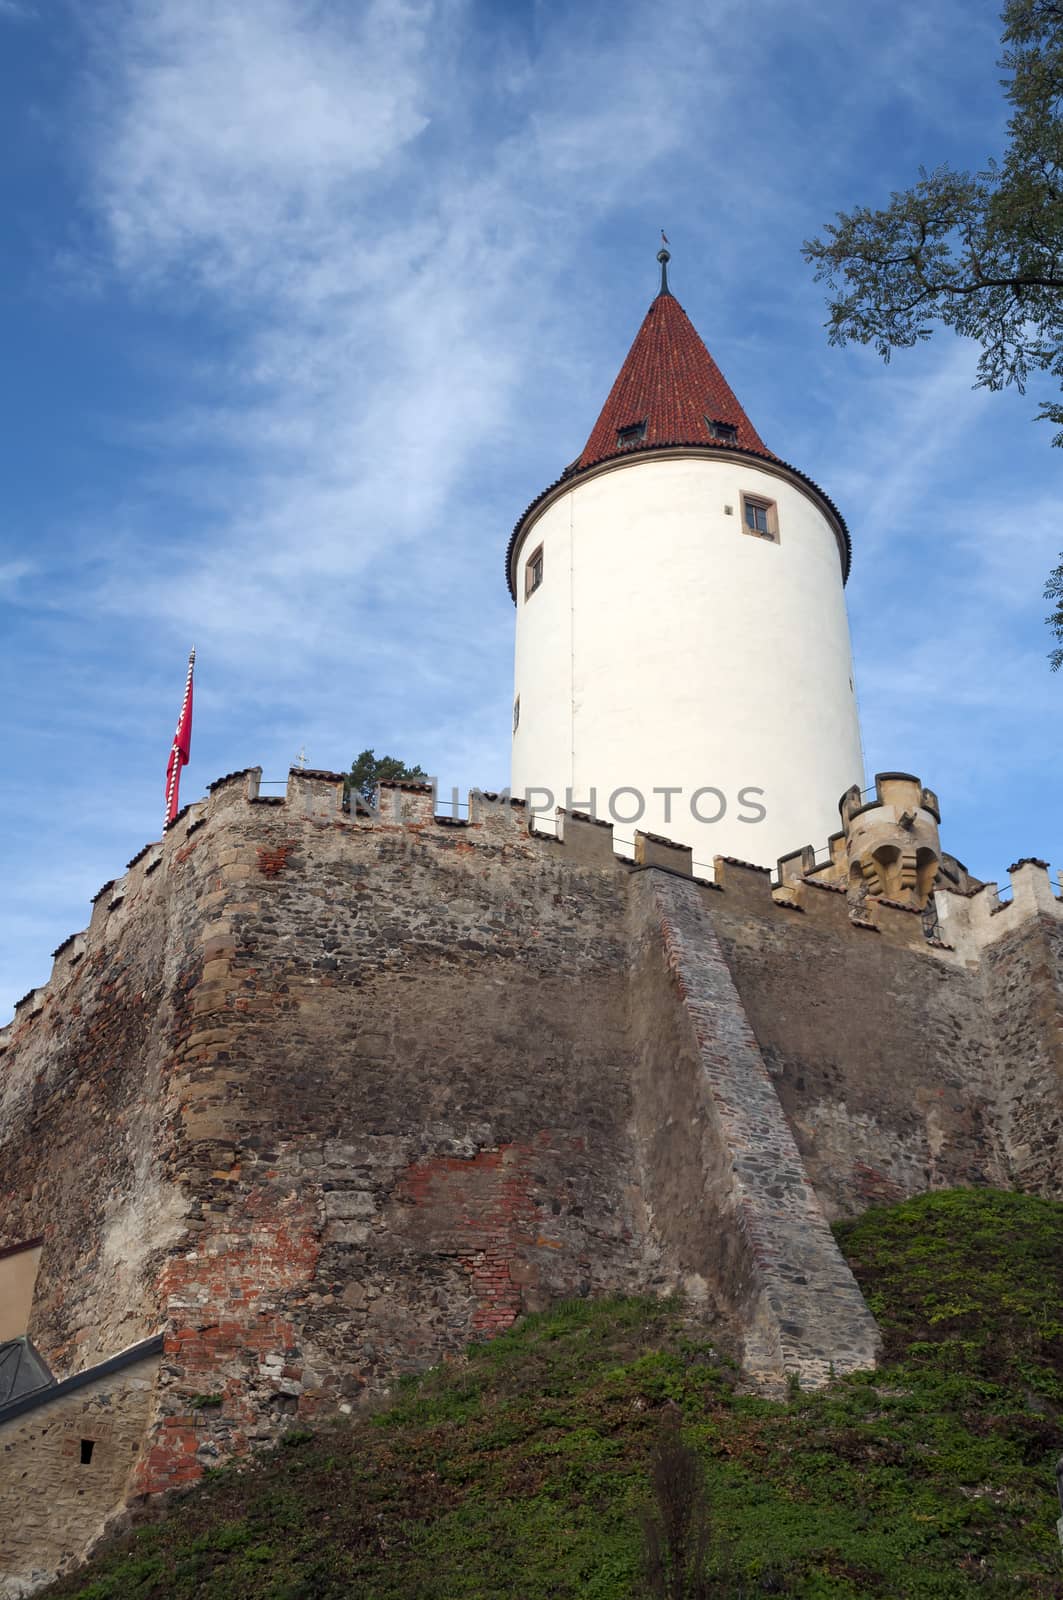 Medieval castle tower and defensive wall in Central Bohemia, Czech Republic.